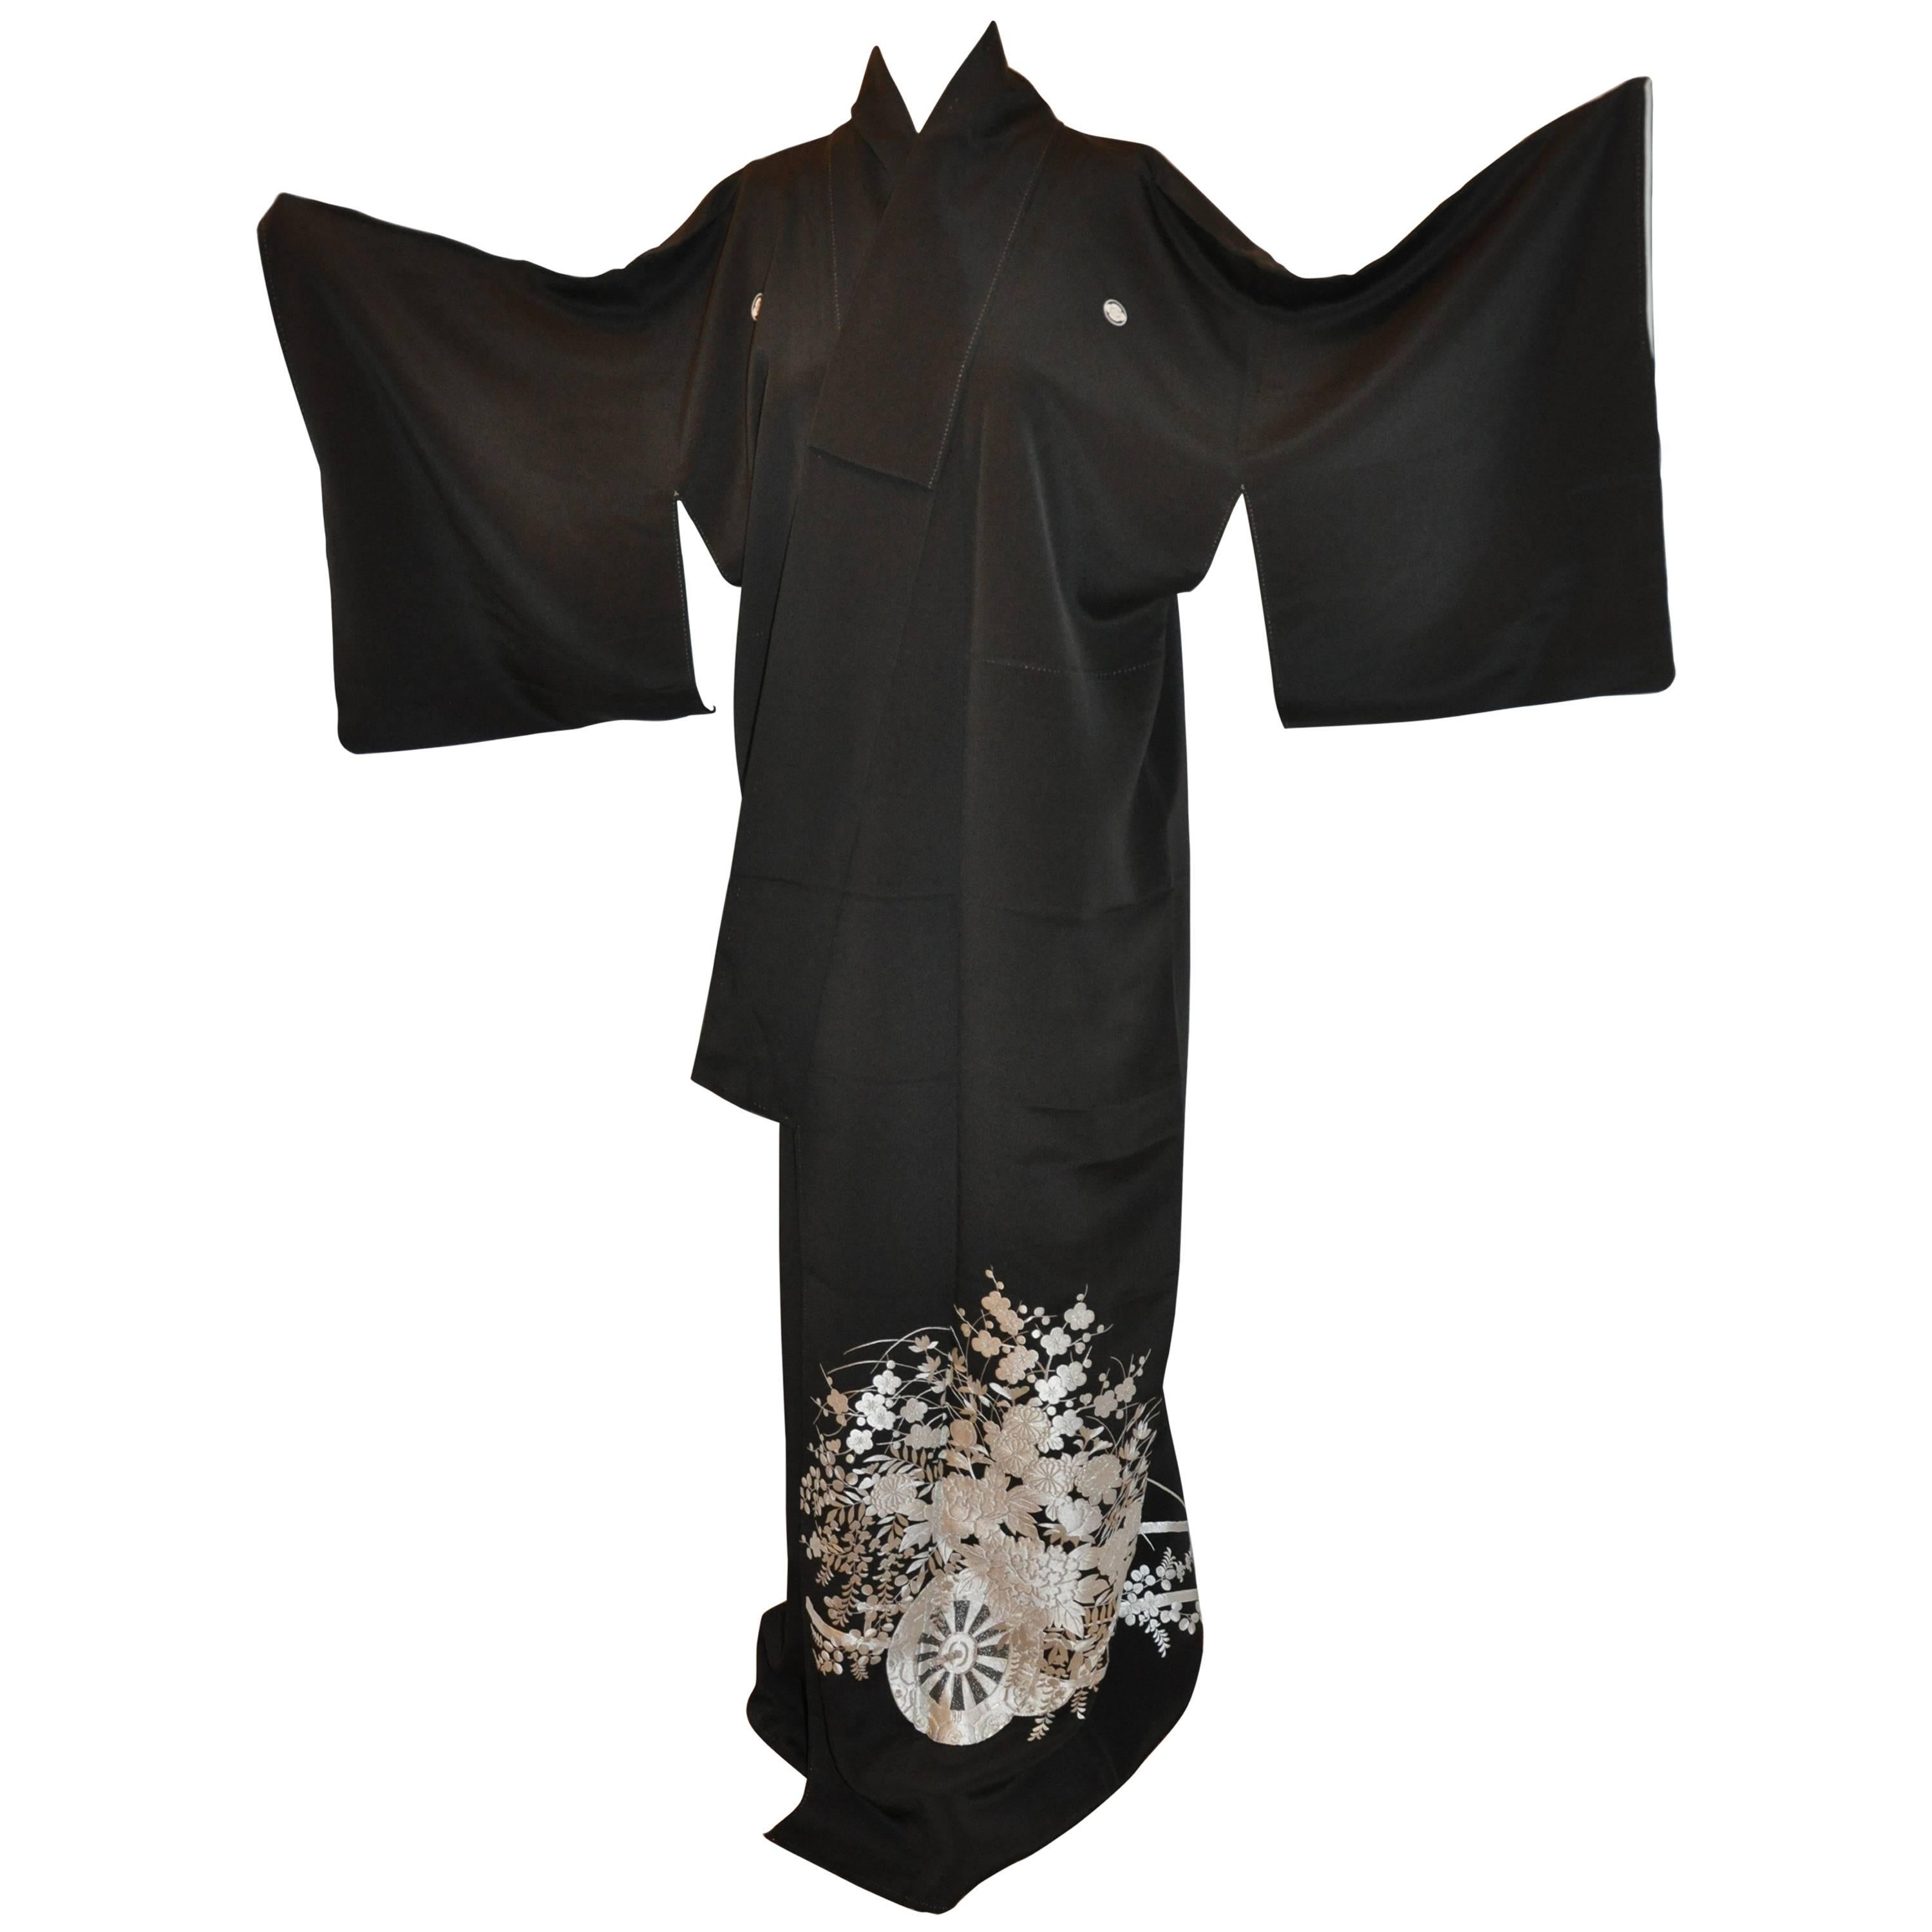 Black with Silver Embroidered "Wagon Filled With Floral" Silk Kimono